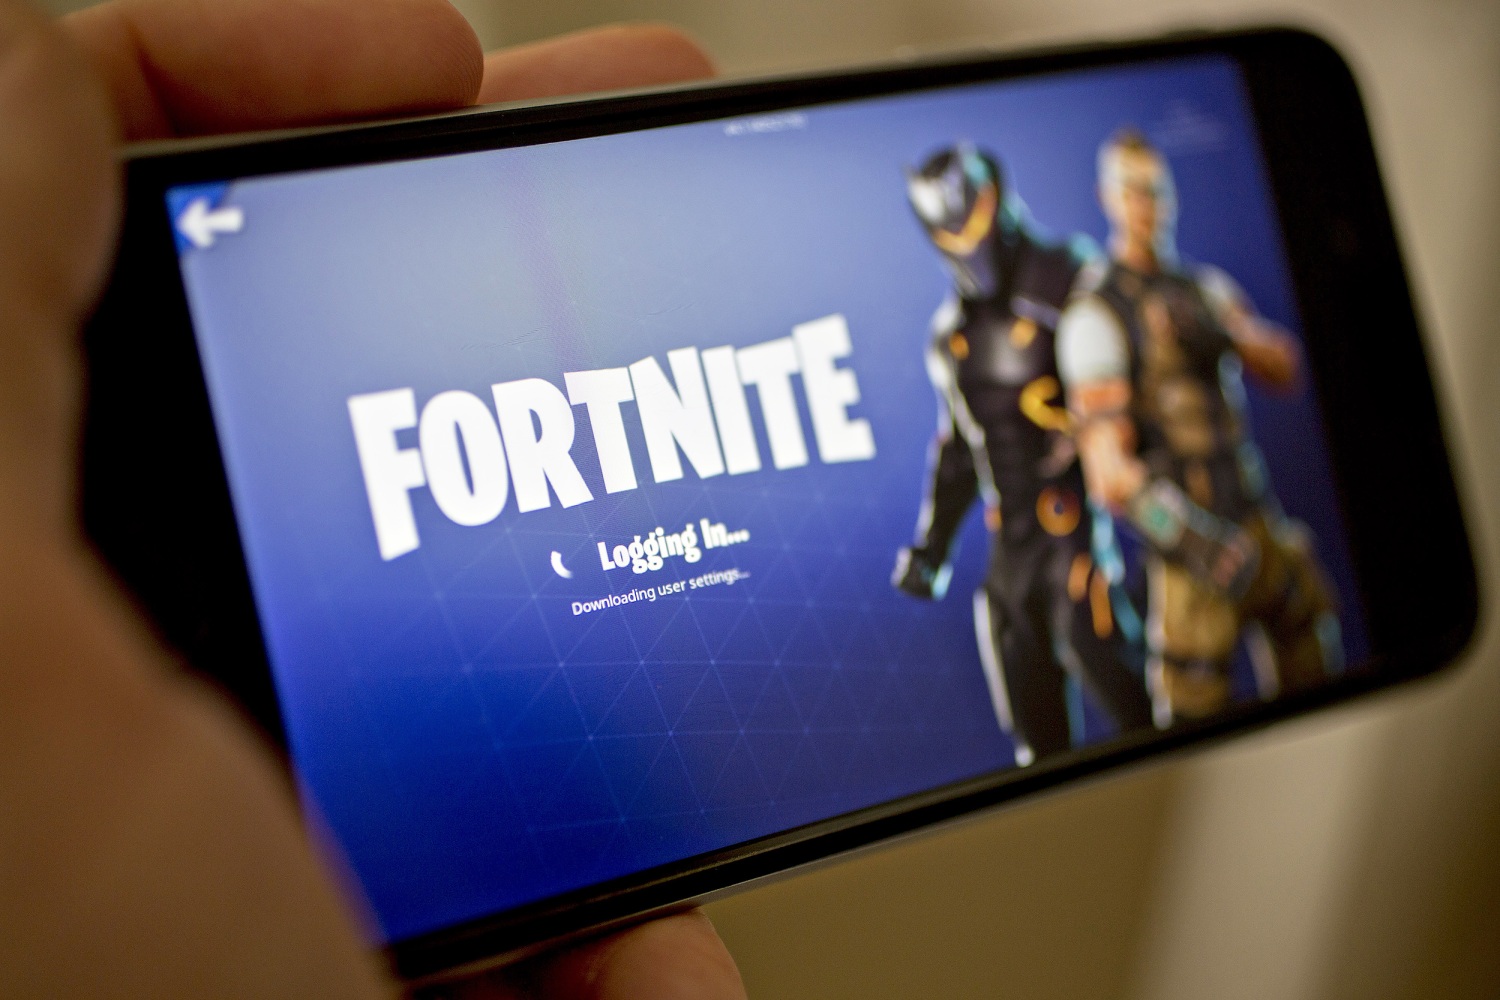 How to Claim Fortnite Refund in FTC Settlement